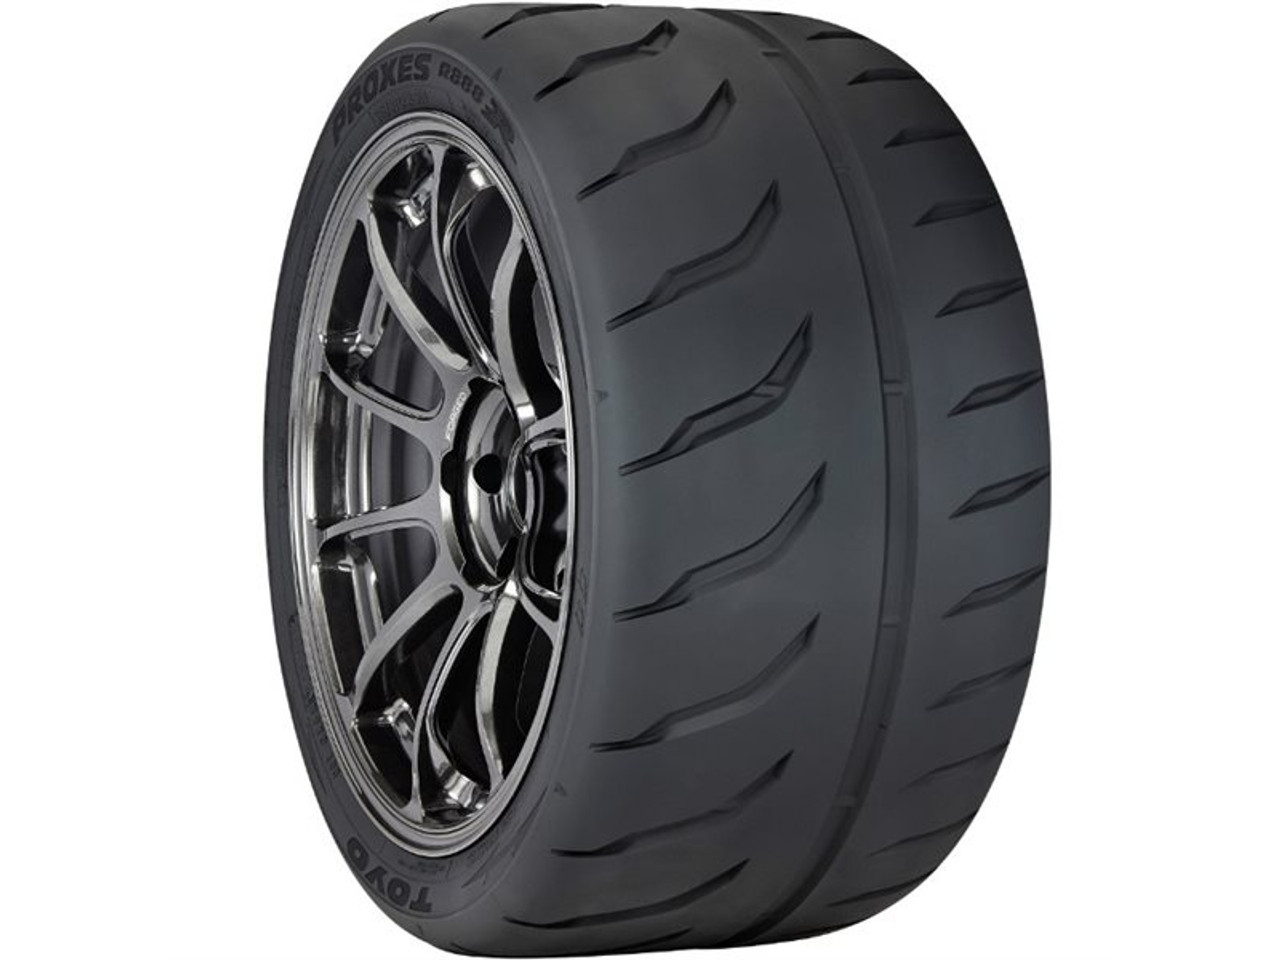 Toyo Tires Proxes R888R